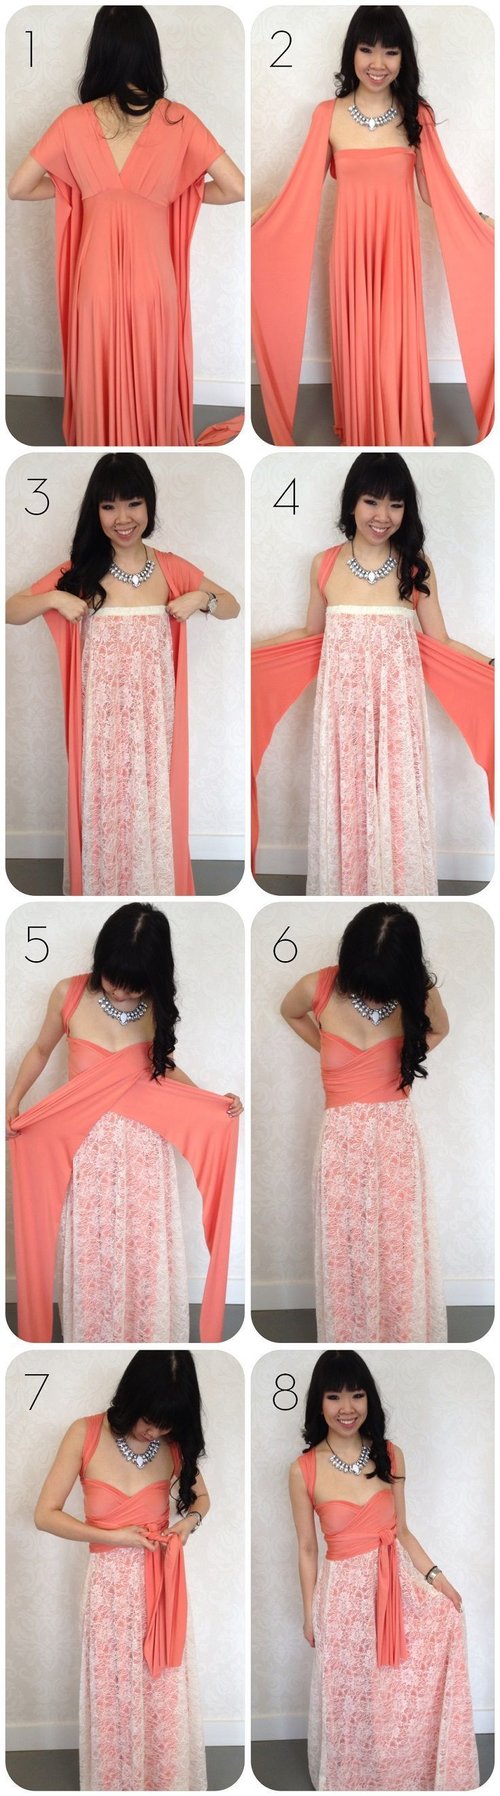  How to add Lace to a Convertible Dress Top 10 #DIY #Clothing #Tutorials very creative